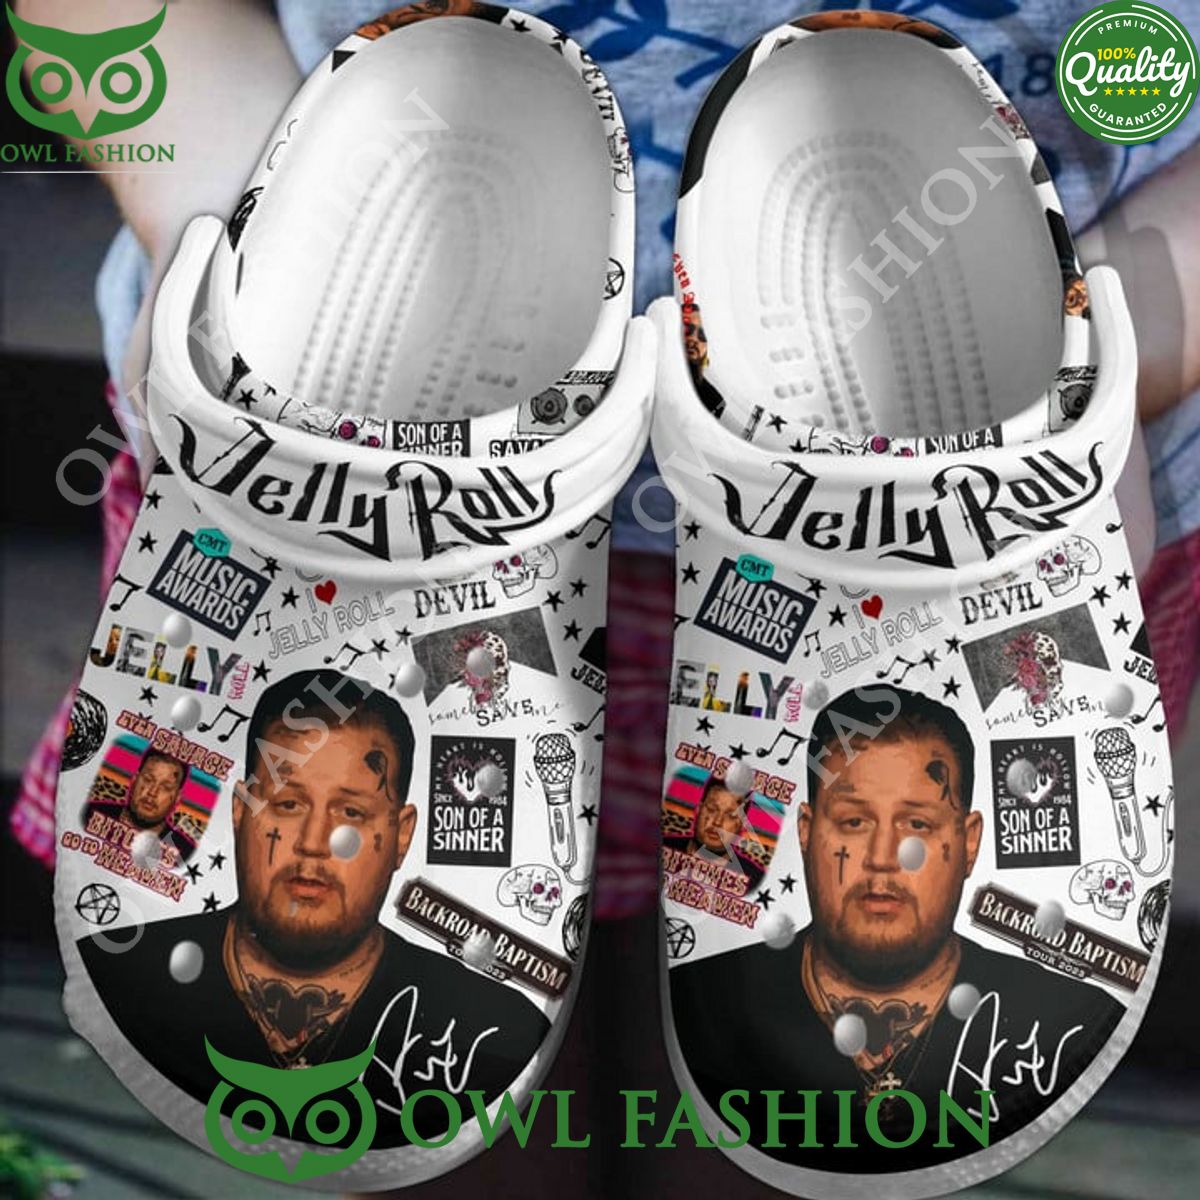 Jelly Roll Collection Son of a sinner Music Awards Crocs